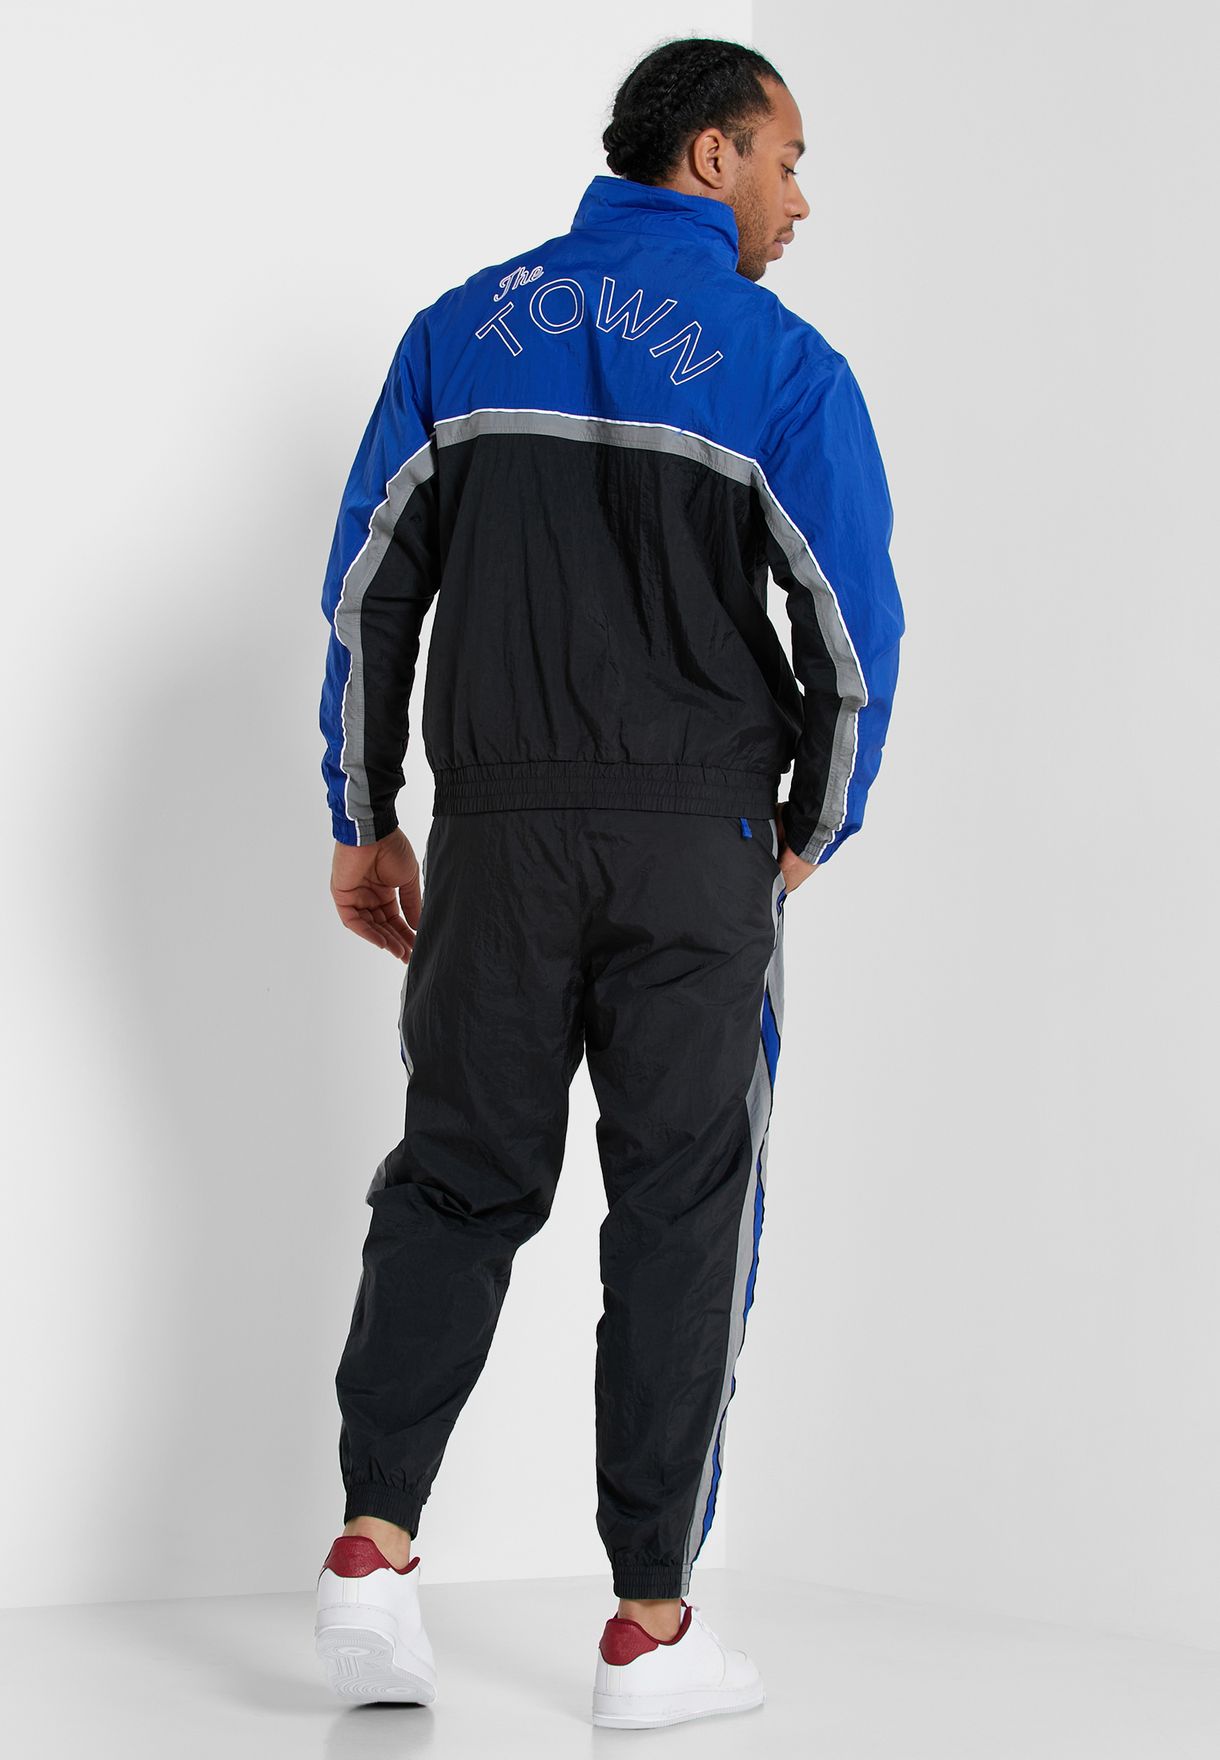 golden state warriors tracksuit nike